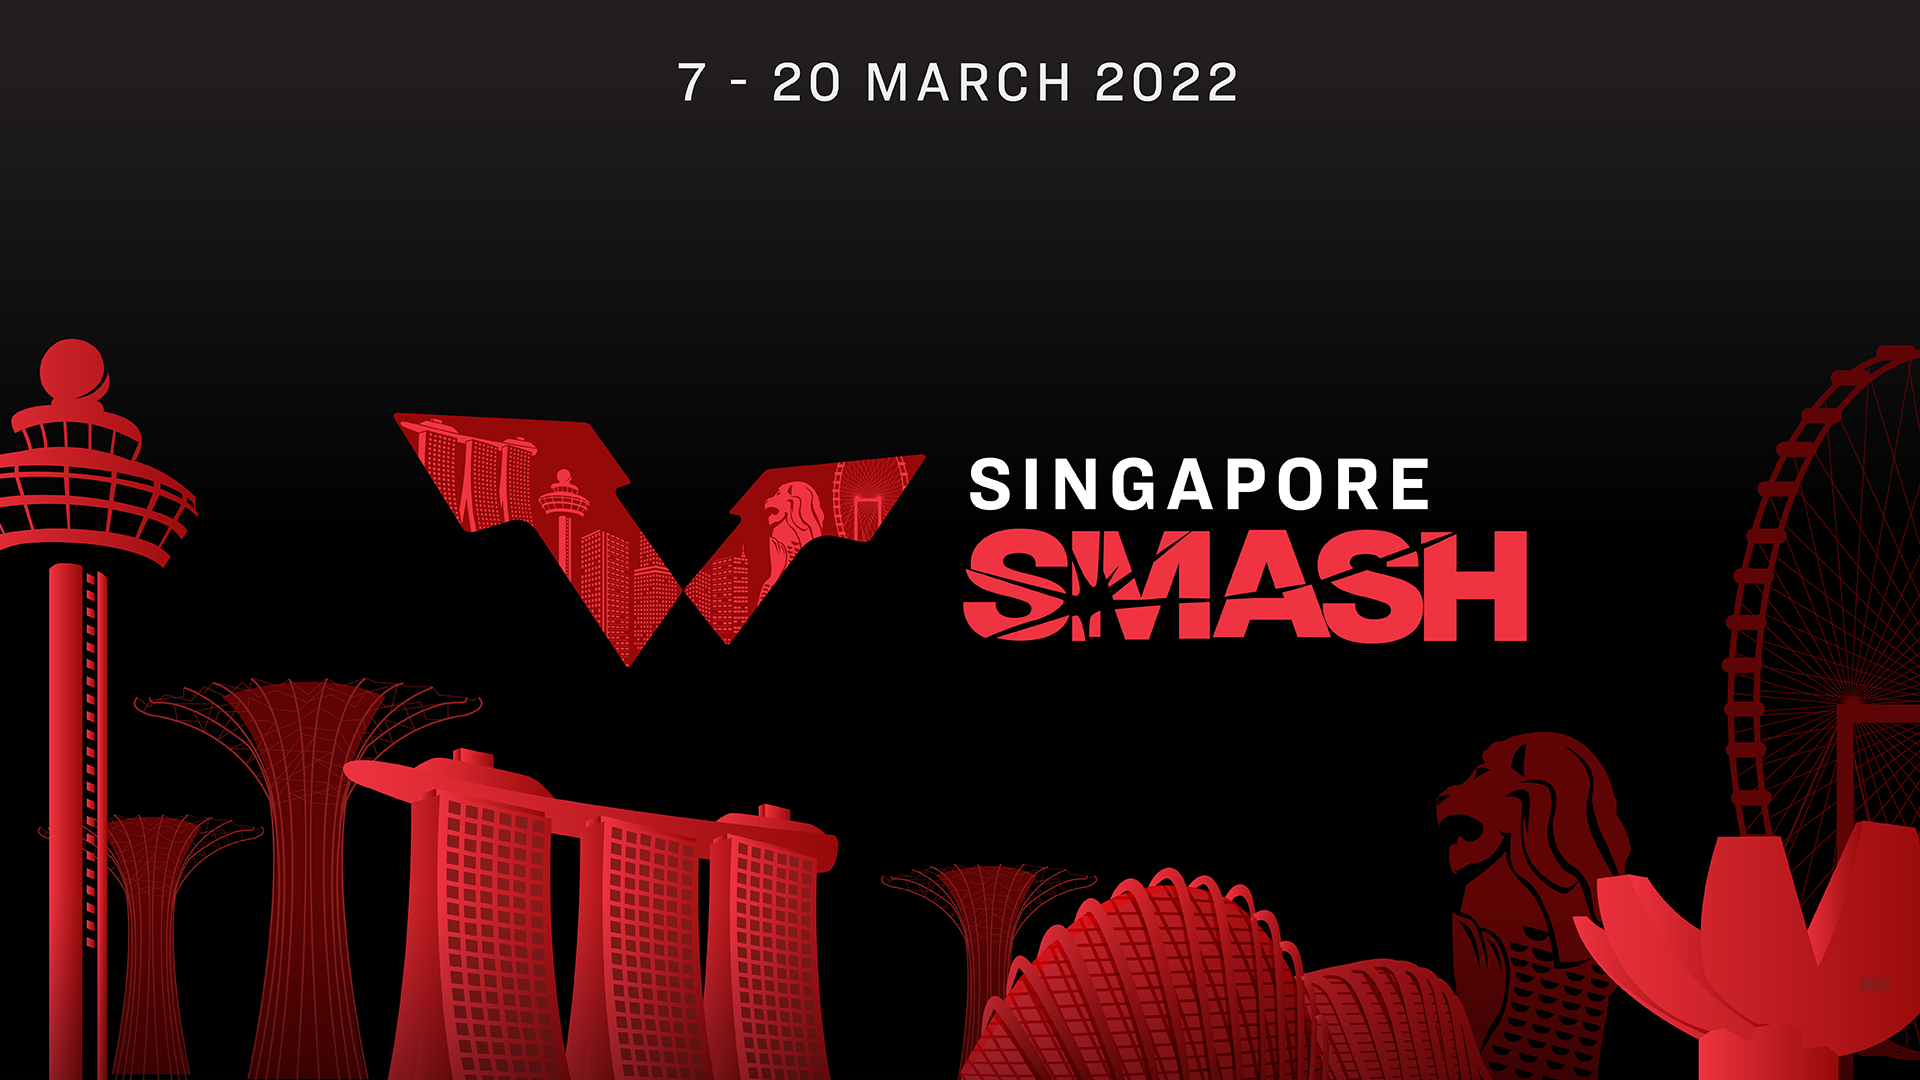 After staging the WTT Cup Finals in December, Singapore has been awarded hosting rights for the inaugural Grand Smash ©WTT